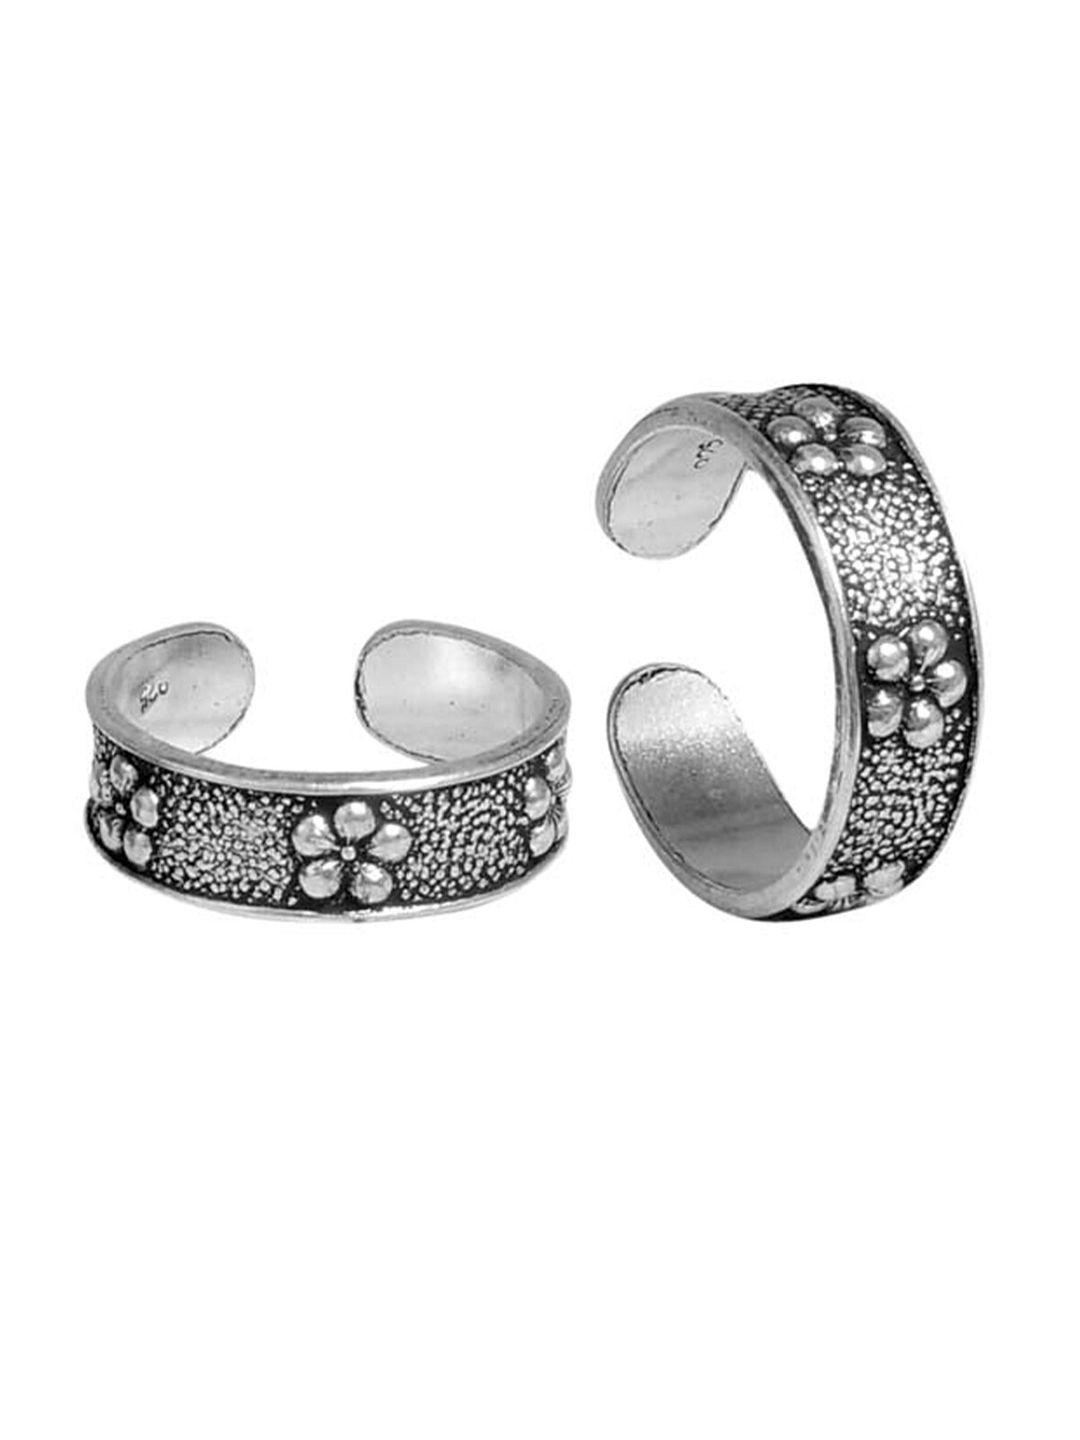 abhooshan-set-of-2-92.5-sterling-silver-set-of-2-oxidized-adjustable-toe-rings